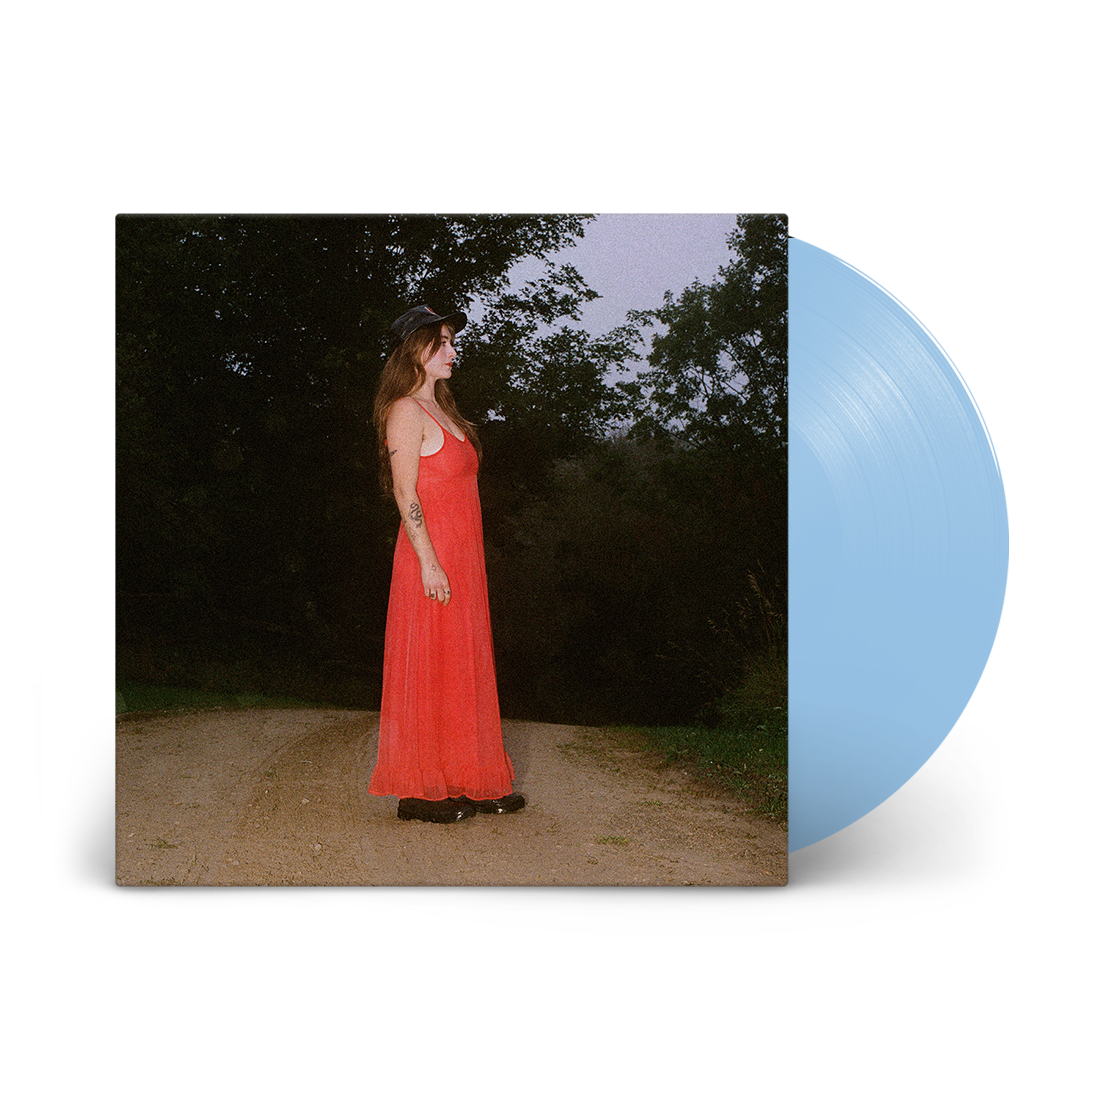 Cuntry Covers Vol. 1: Limited Edition Baby Blue Vinyl LP